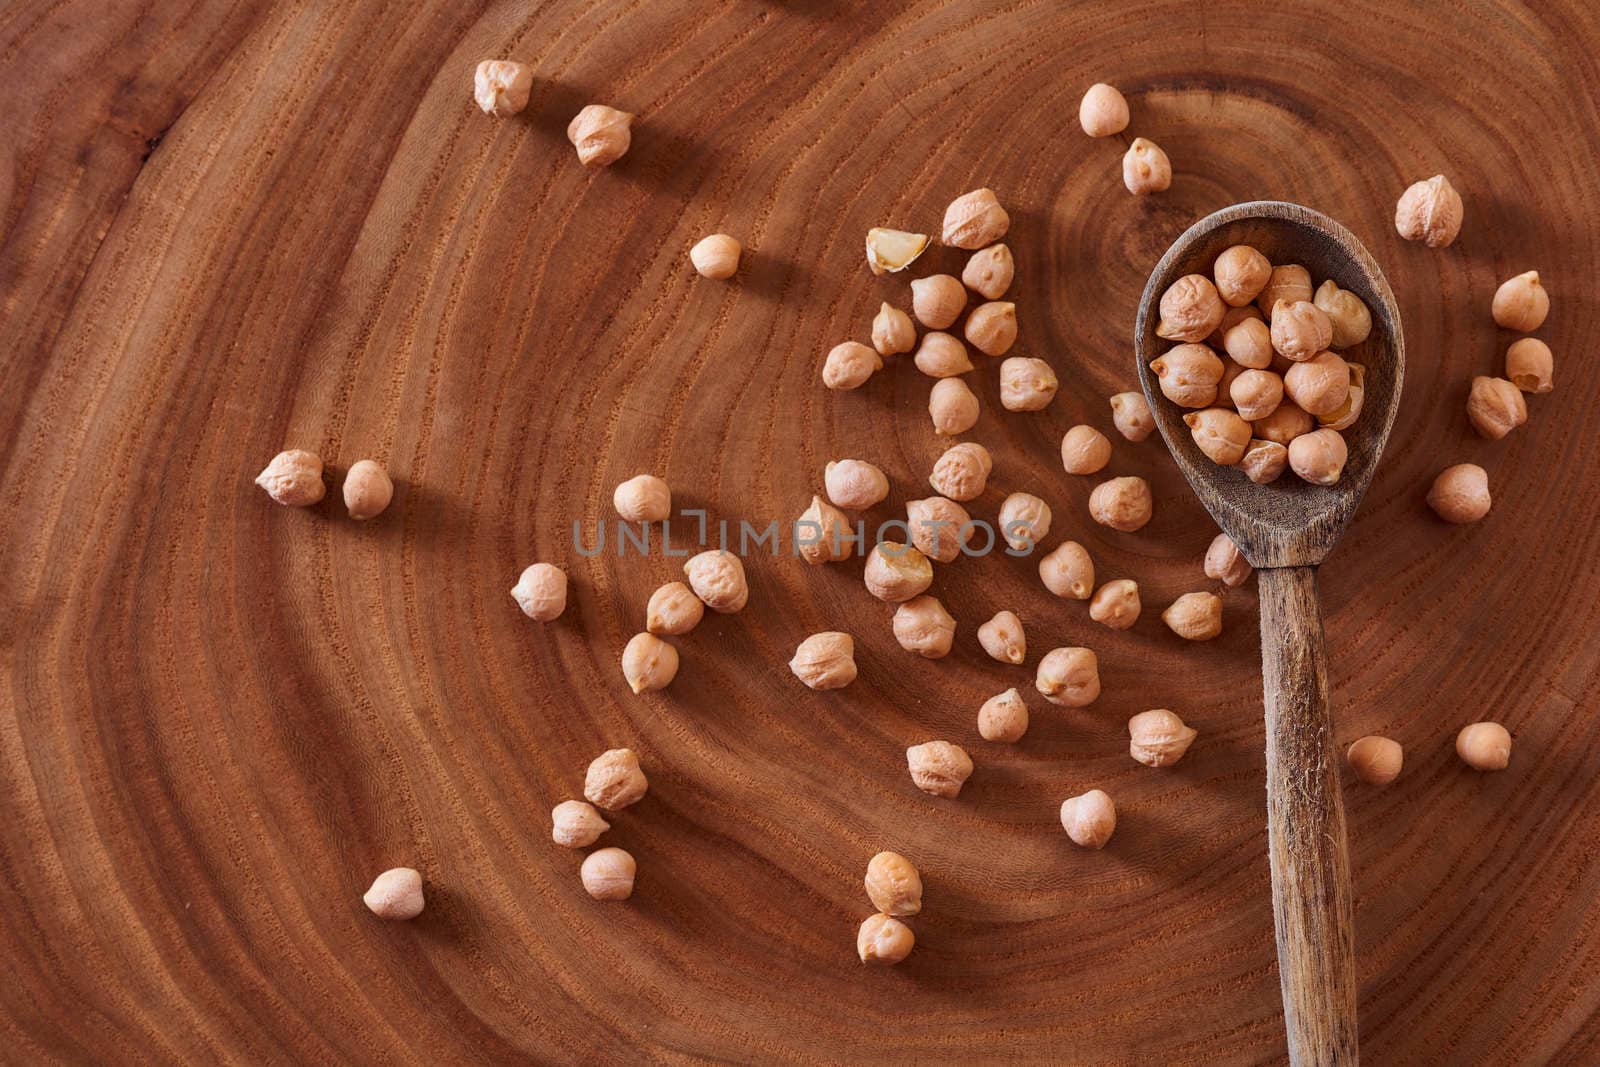 Superfood chickpeas lie in wooden background with spoon. Close-up. Top view. High quality photo